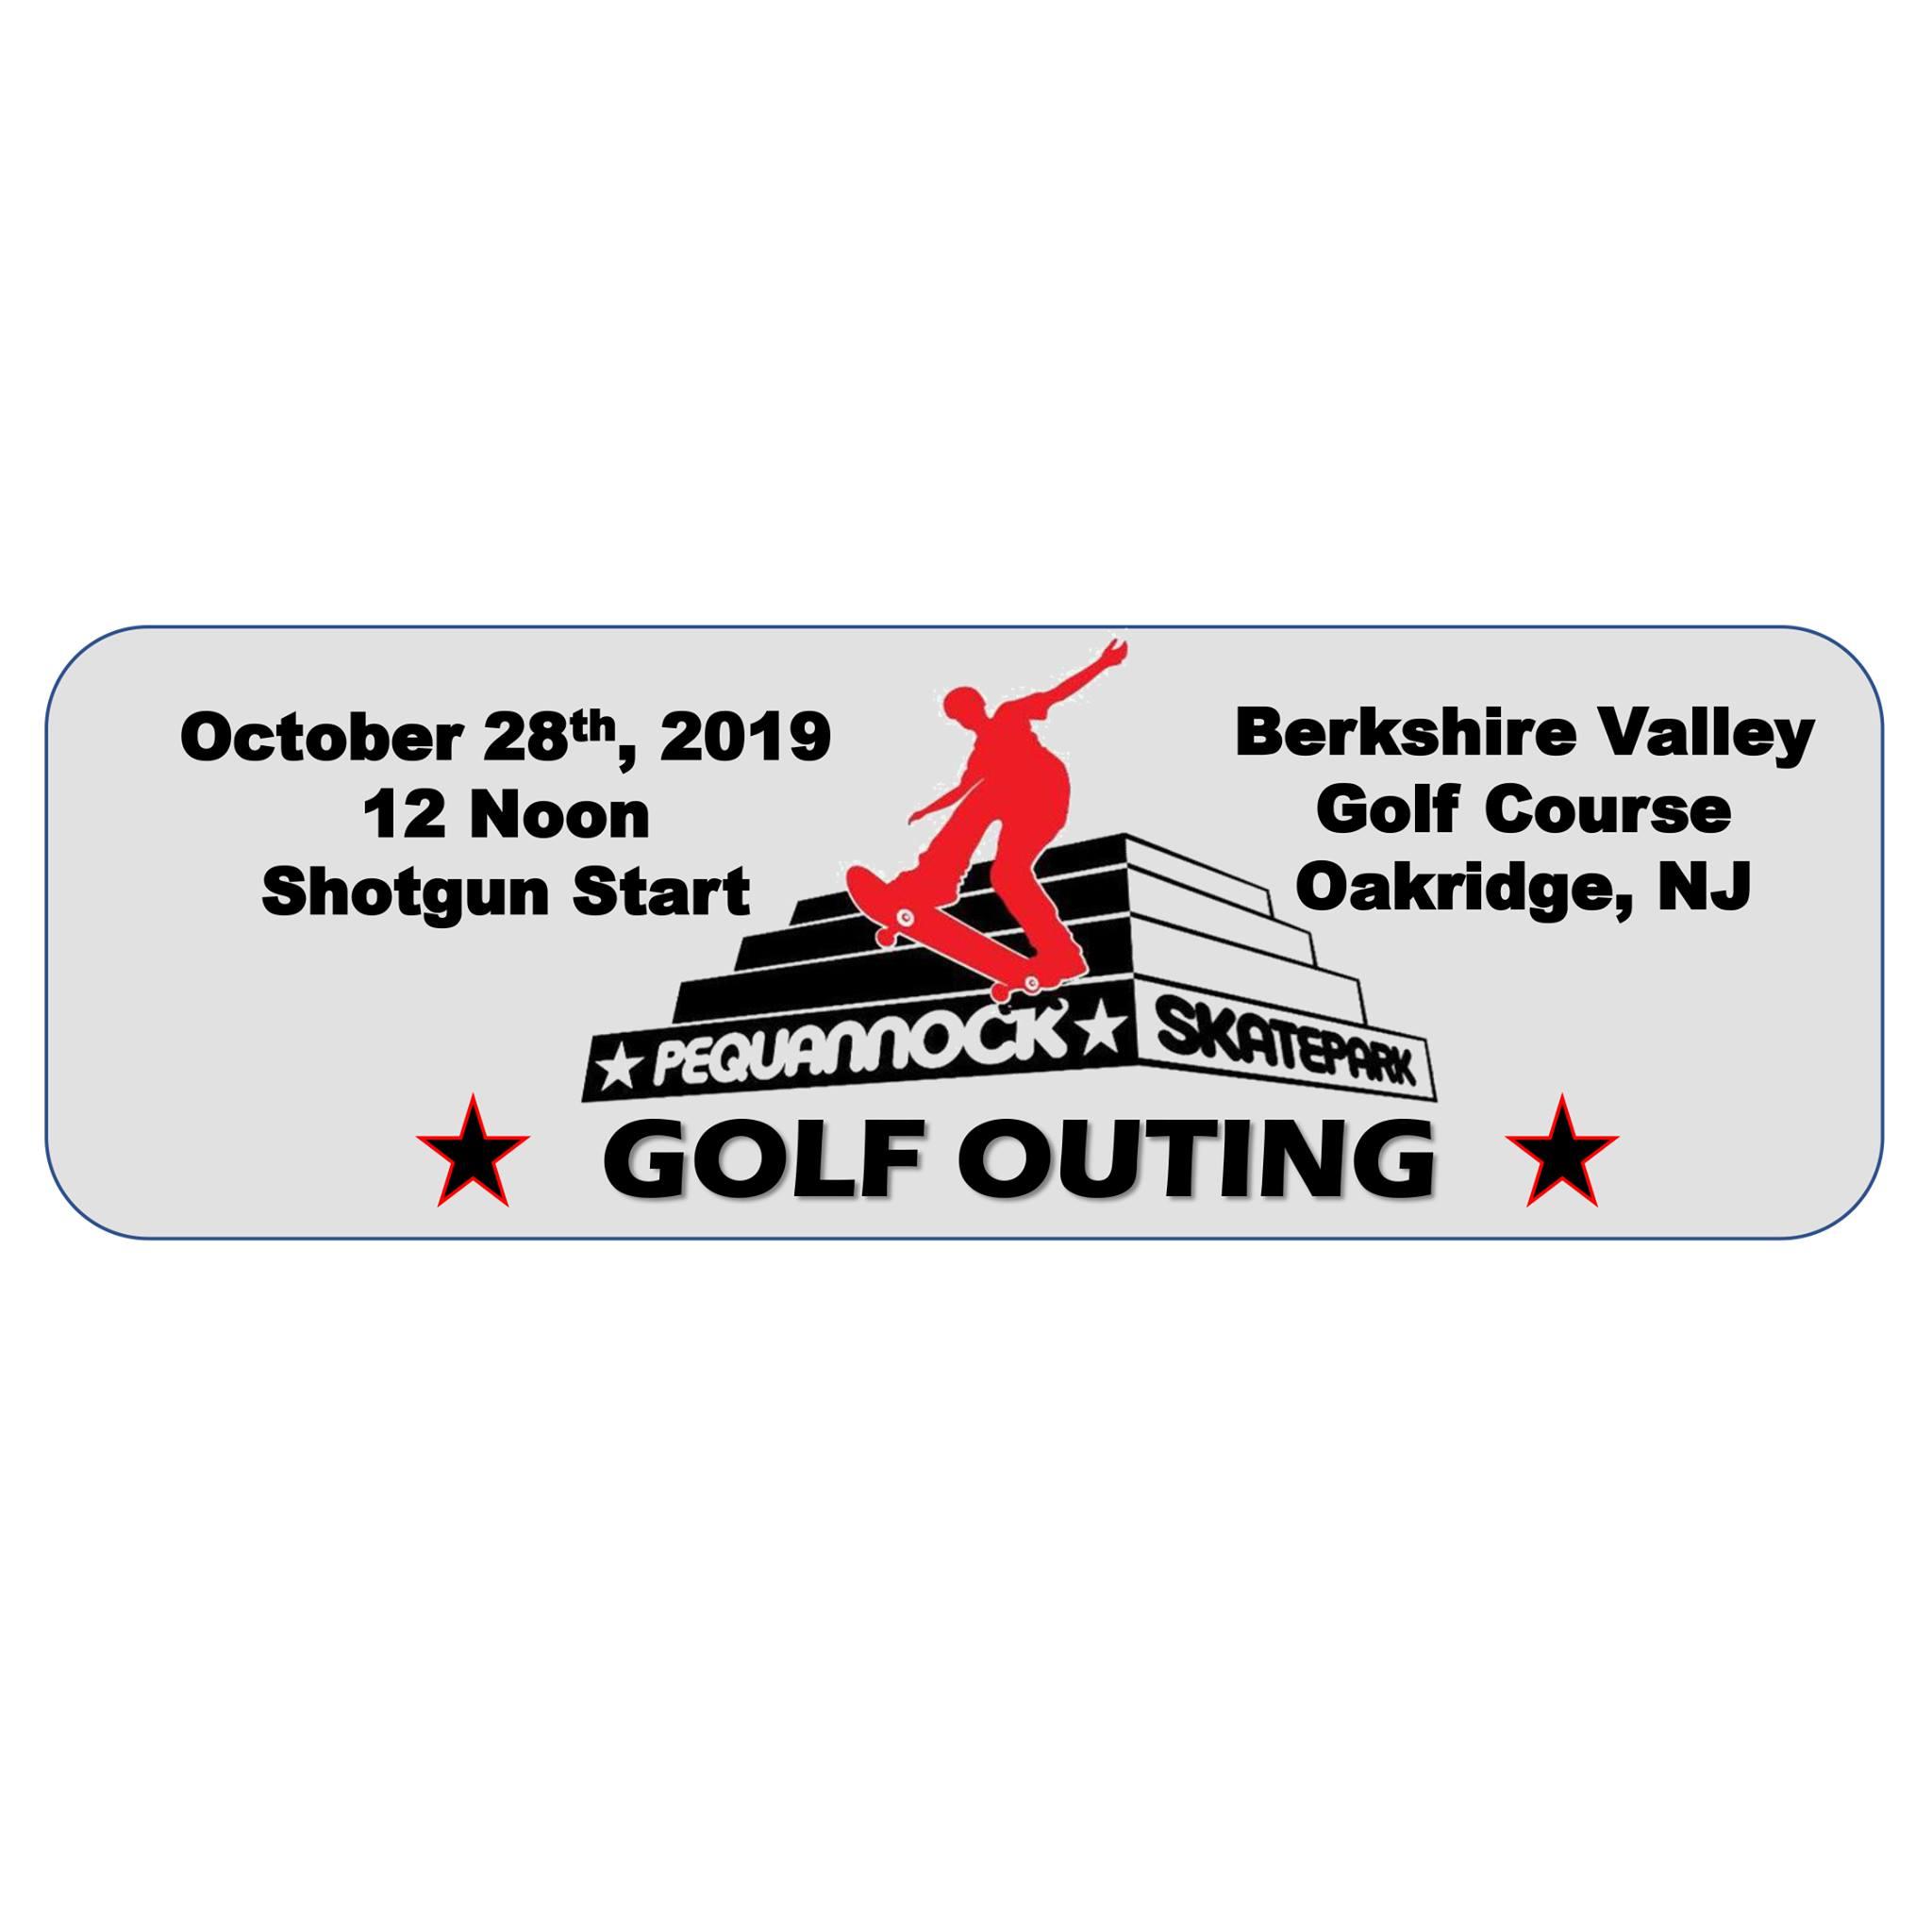 PSA Golf Outing